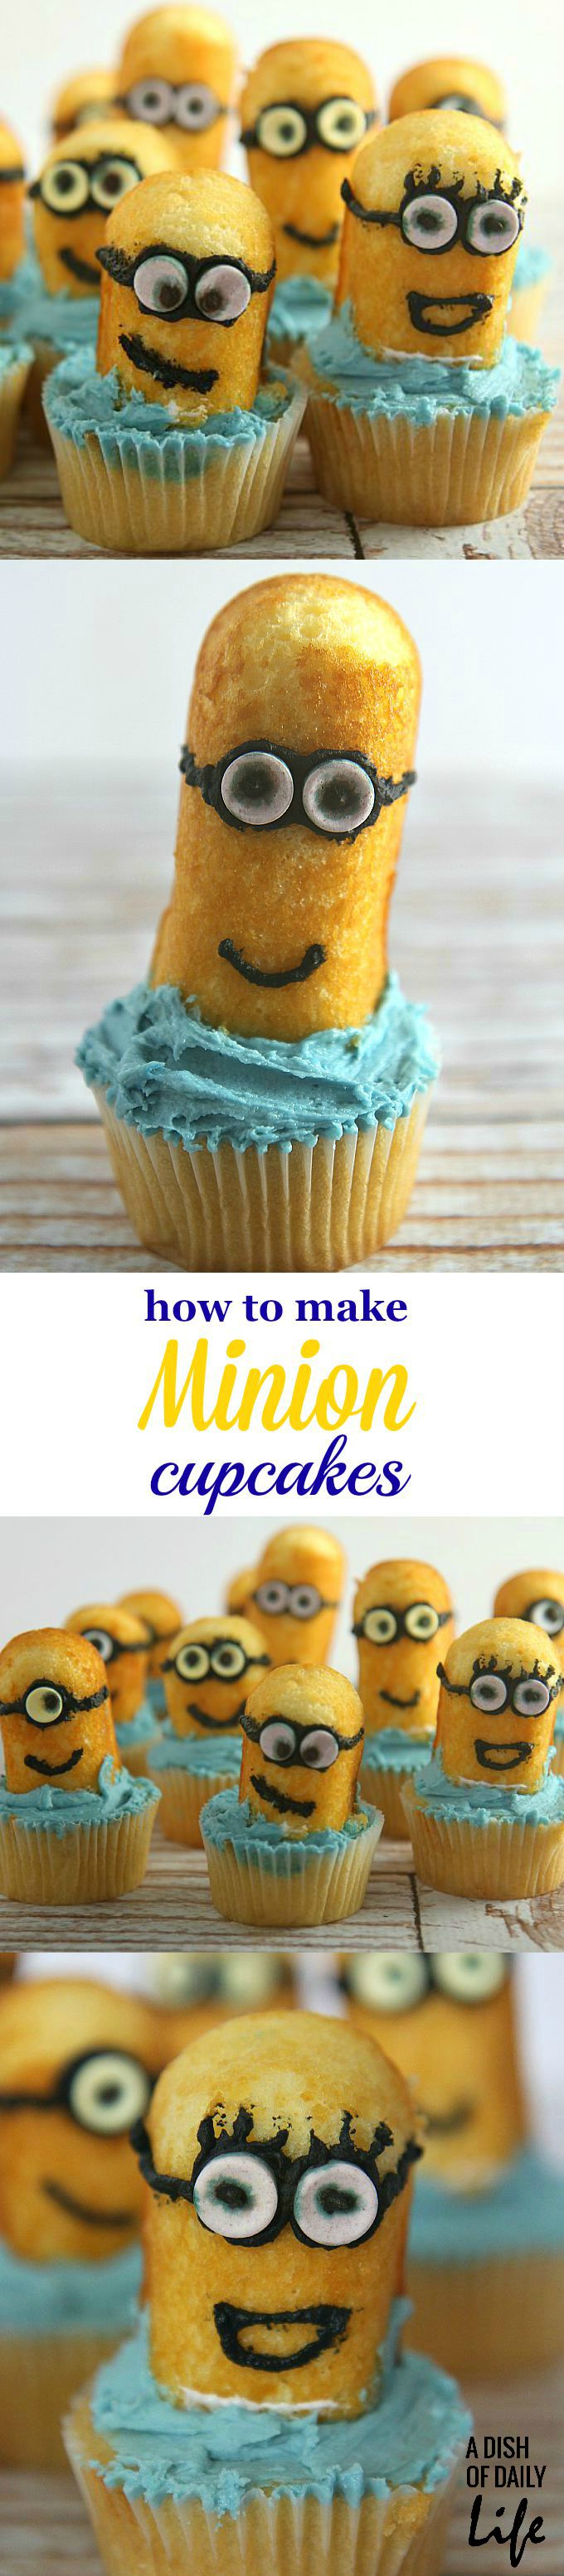 Easy Minion Cupcakes tutorial guaranteed to please any Minion fan! Fun birthday party idea, family baking project, or for teenagers to make with kids when babysitting!